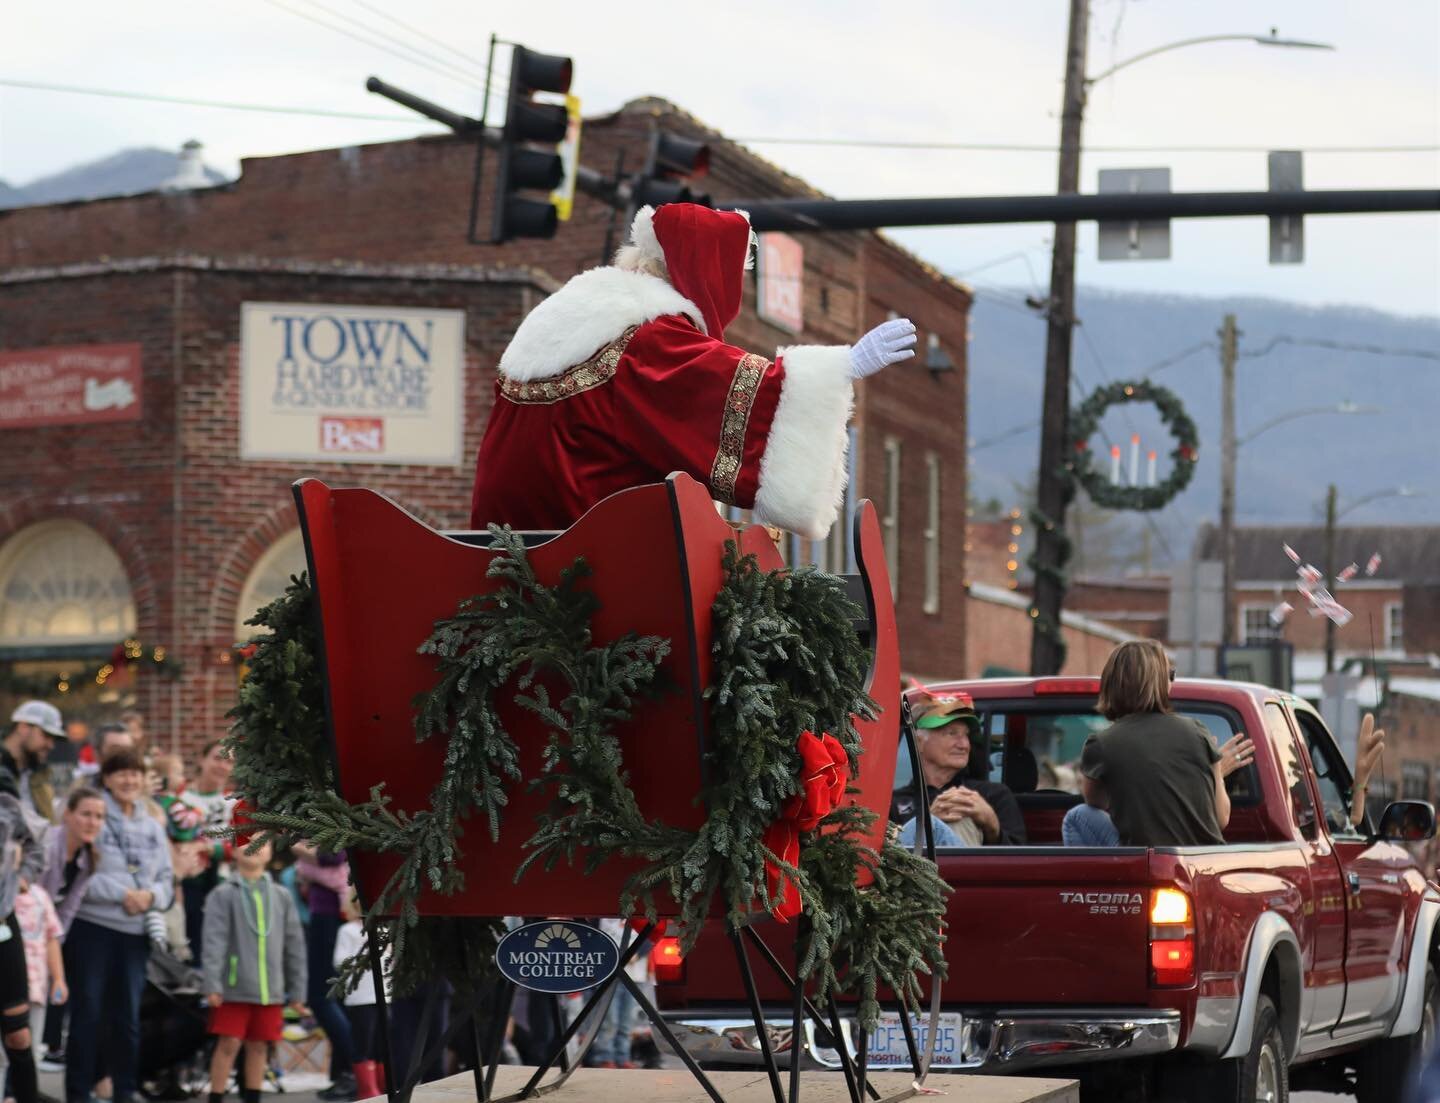 If you're looking to get into the Holiday spirit in the Swannanoa Valley, this is the weekend to do it, according to Fred McCormick. Read why he believes this is a time of year the Valley shines a little brighter, and find out more about upcoming fes